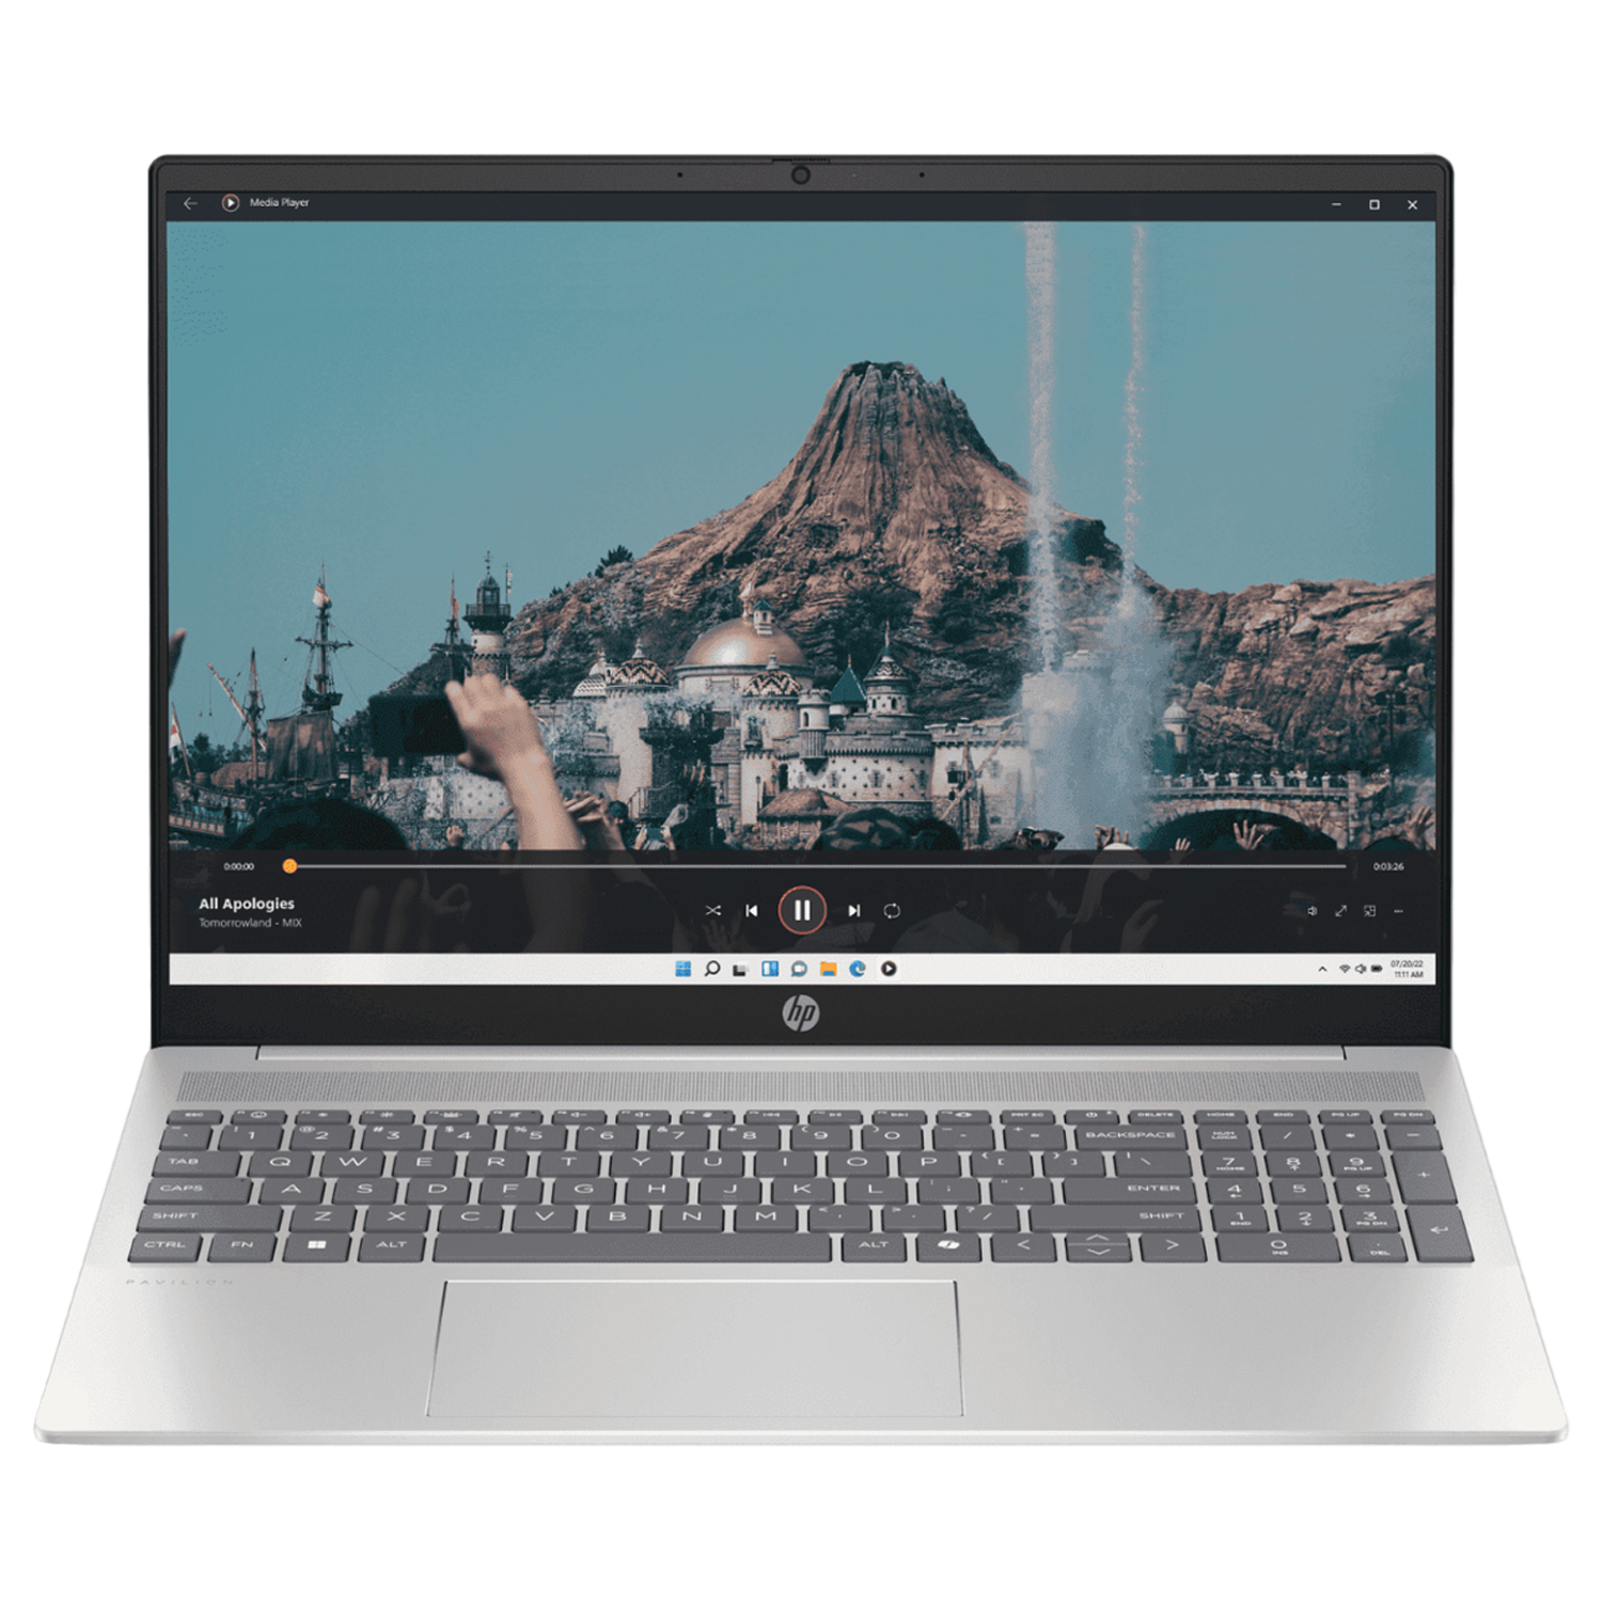 HP Pavilion 16 Intel Core Ultra 5 Laptop (16GB, 512GB SSD, Windows 11 Home, 16 inch Full HD IPS Display, MS Office 2021, Natural Silver Aluminum, 1.77 KG)